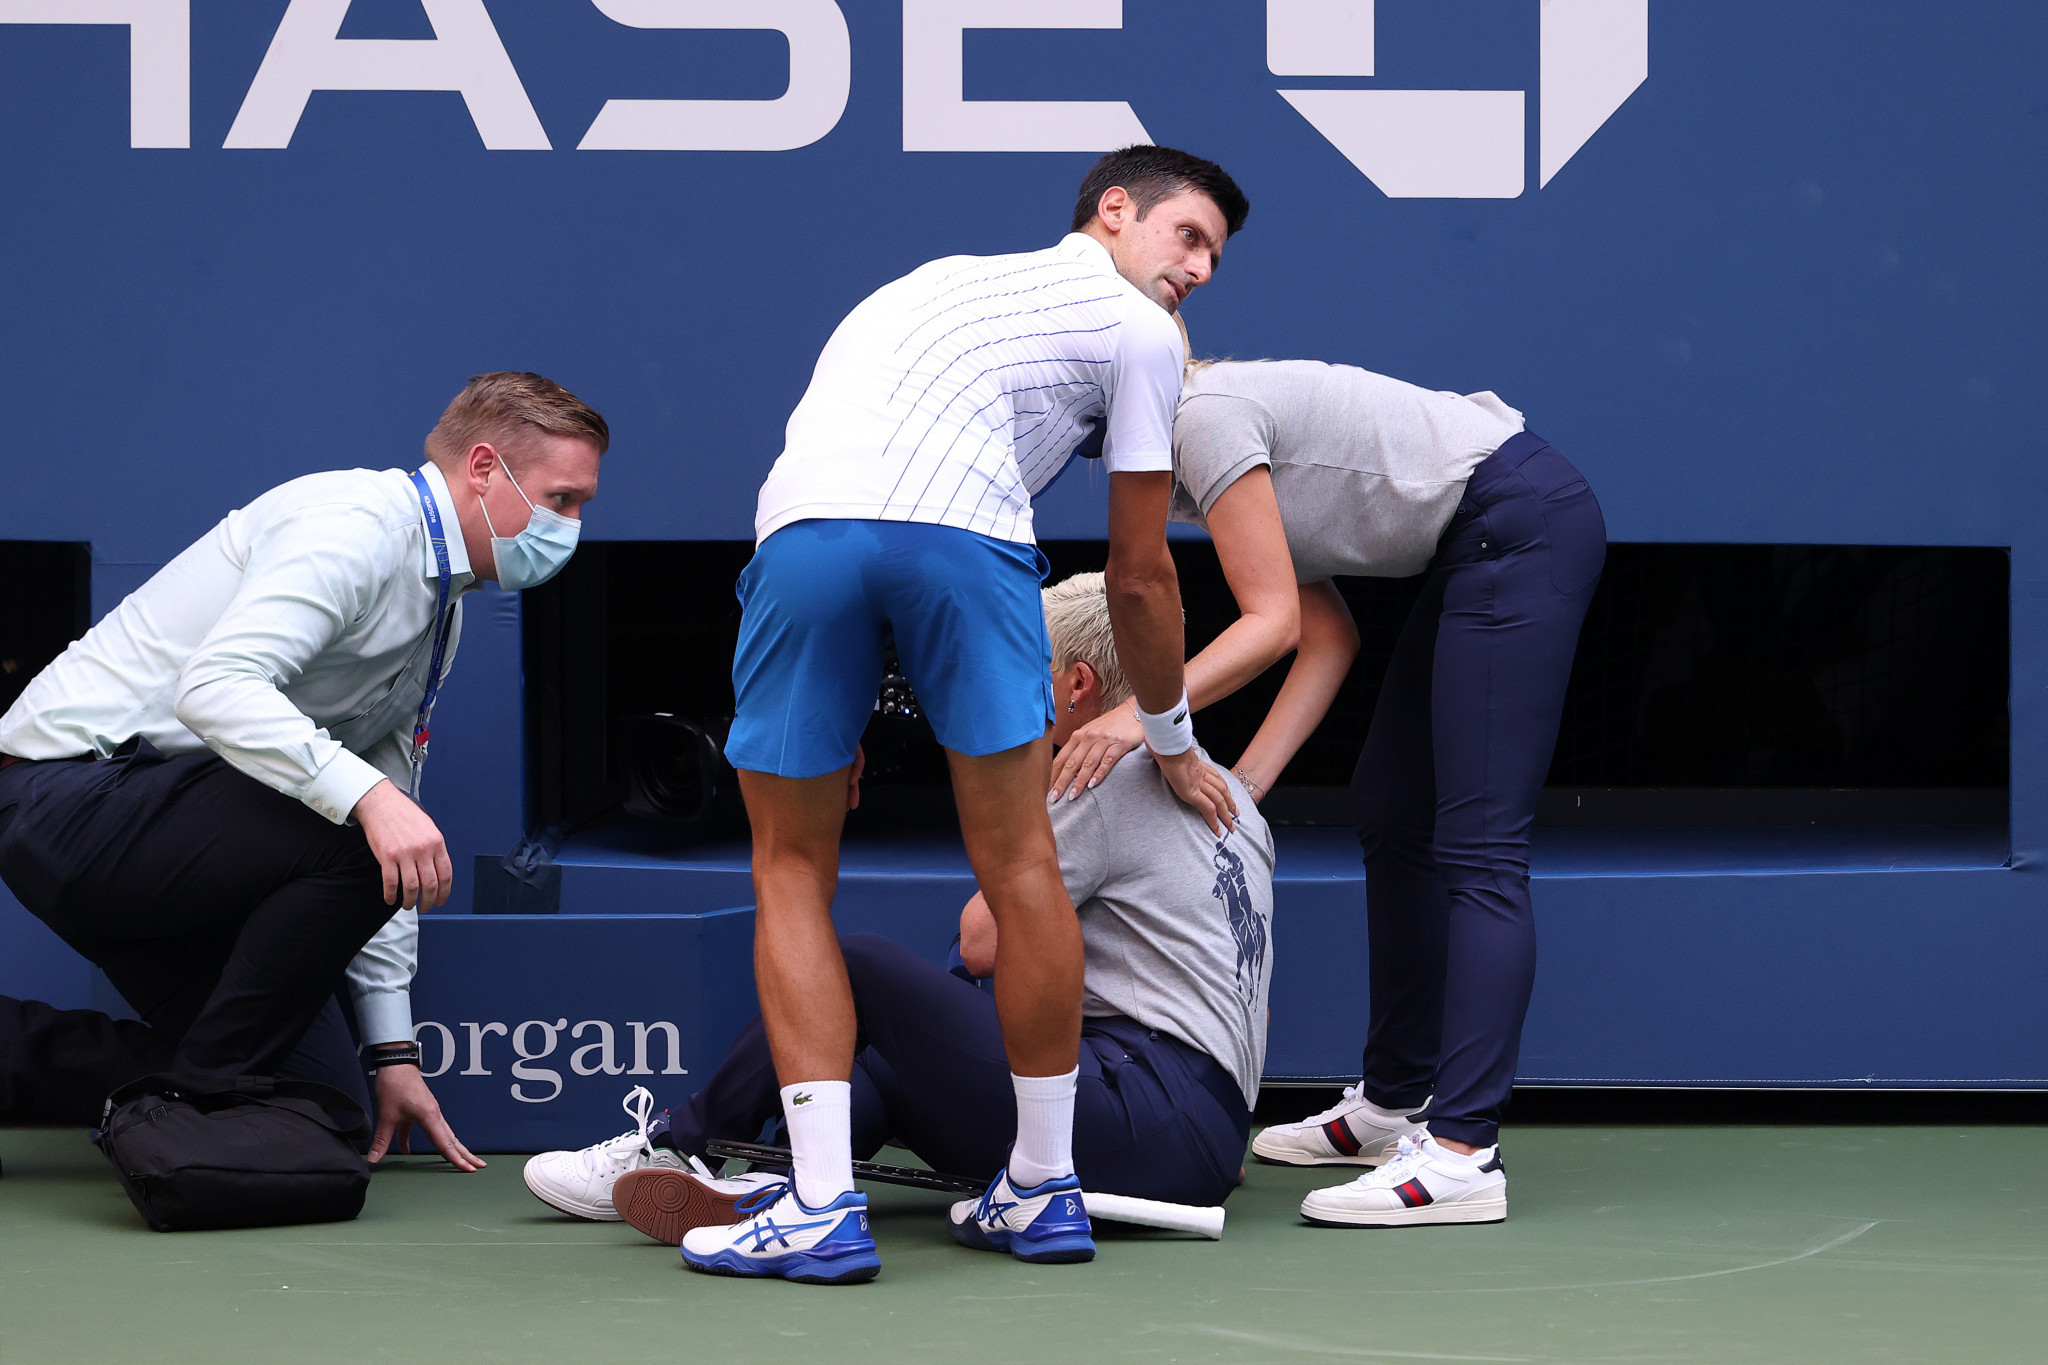 Novak Djokovic was disqualified from the US Open after hitting a line judge with a ball during his fourth-round match ©Getty Images